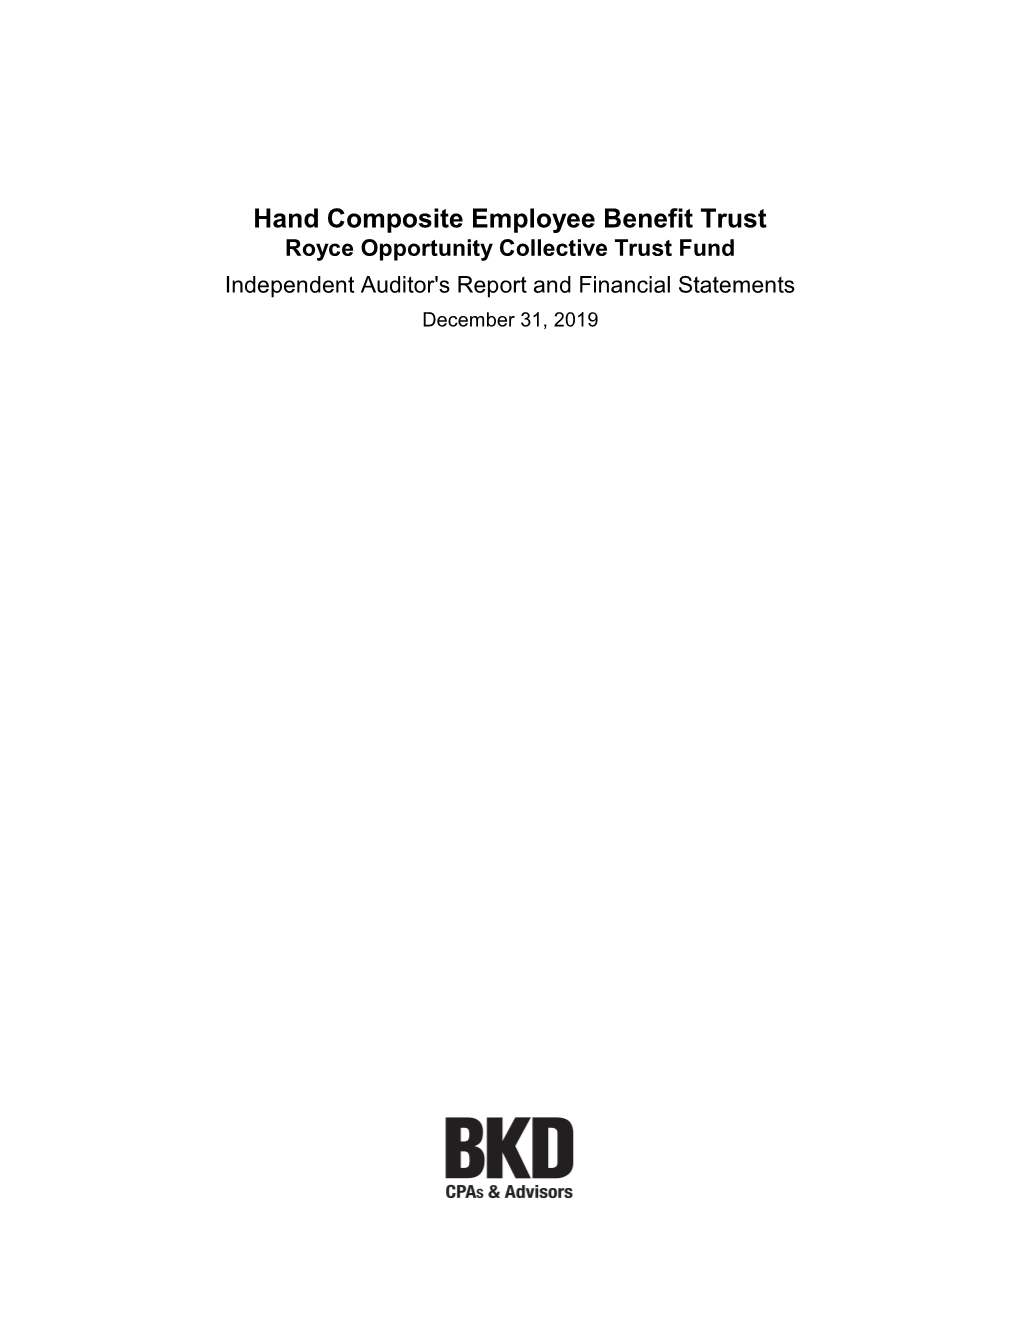 Hand Composite Employee Benefit Trust Royce Opportunity Collective Trust Fund Independent Auditor's Report and Financial Statements December 31, 2019